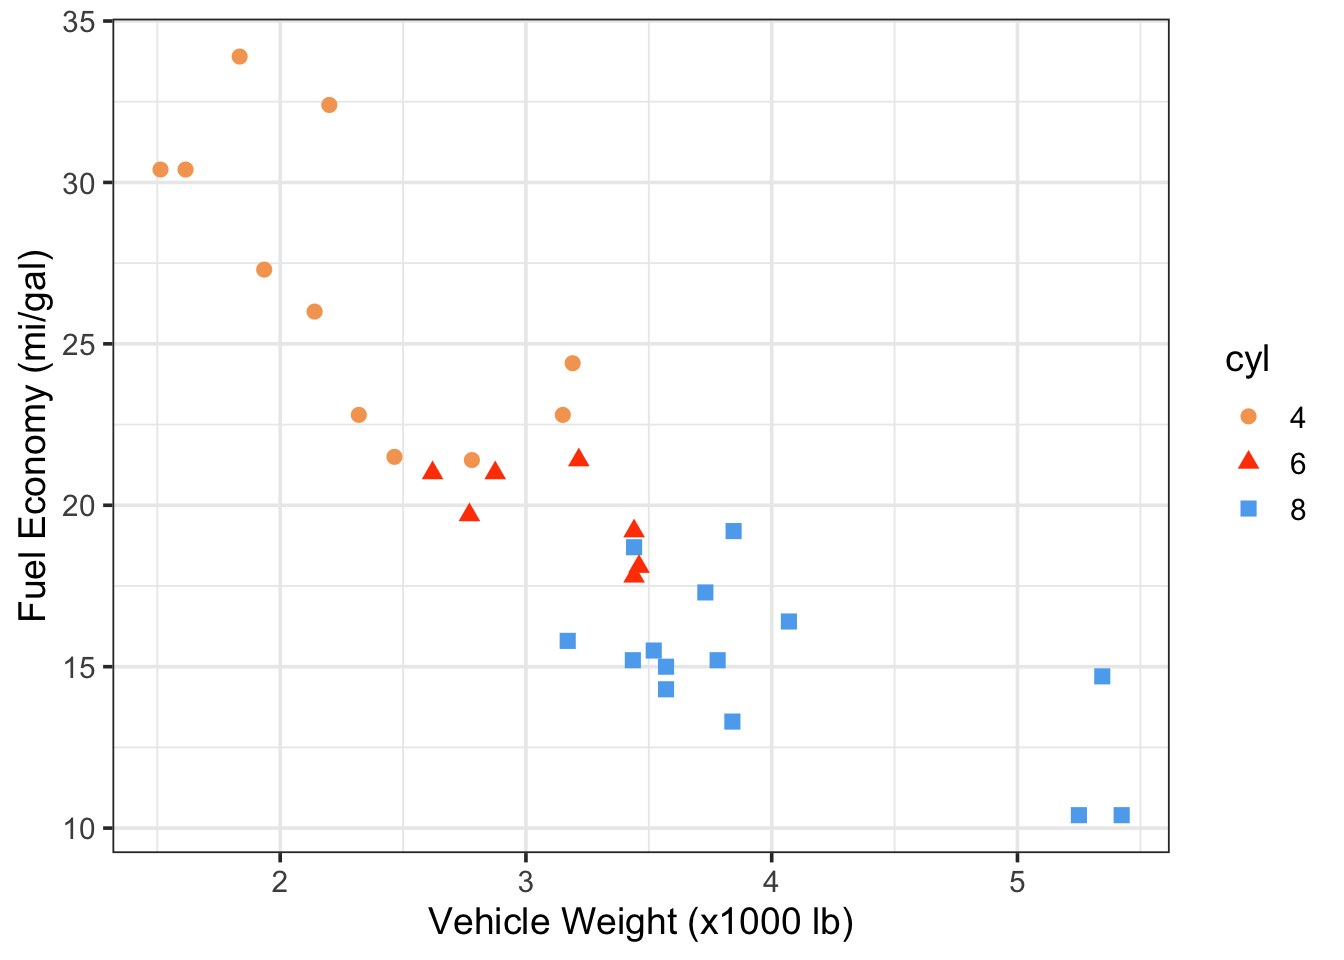 Vehicle fuel economy vs. weight and colored by number of engine cylinders (data from mtcars)